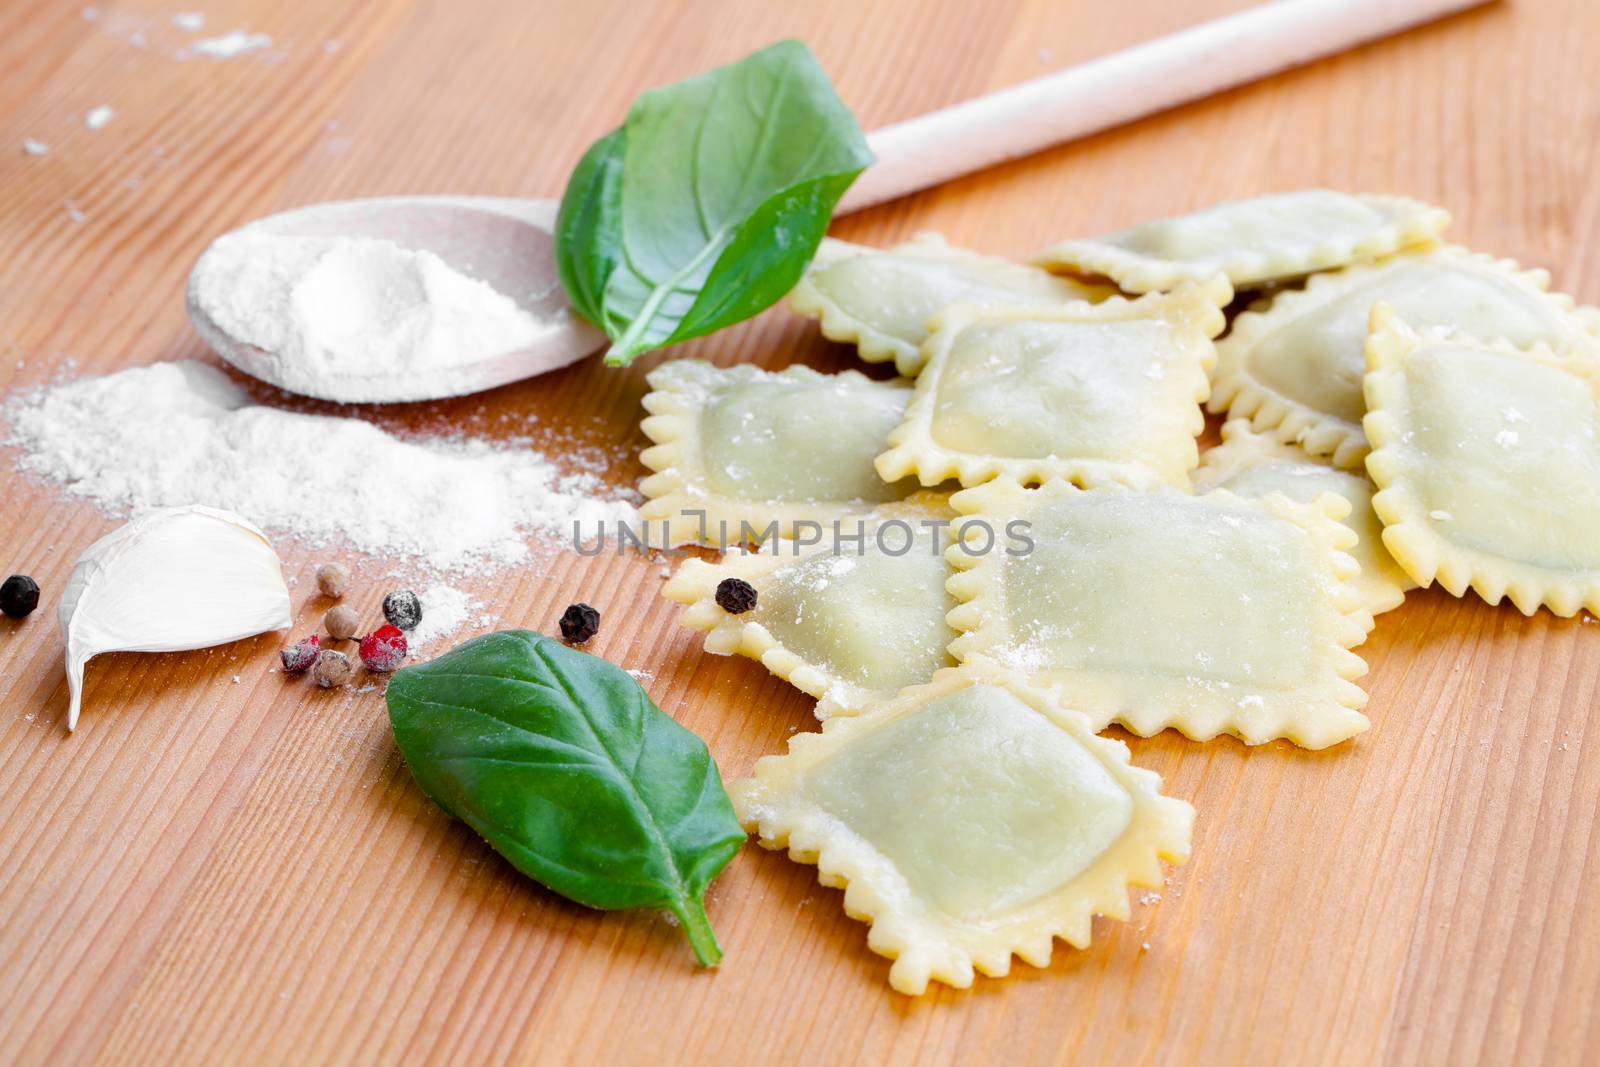 Raw ravioli with flour on wooden table